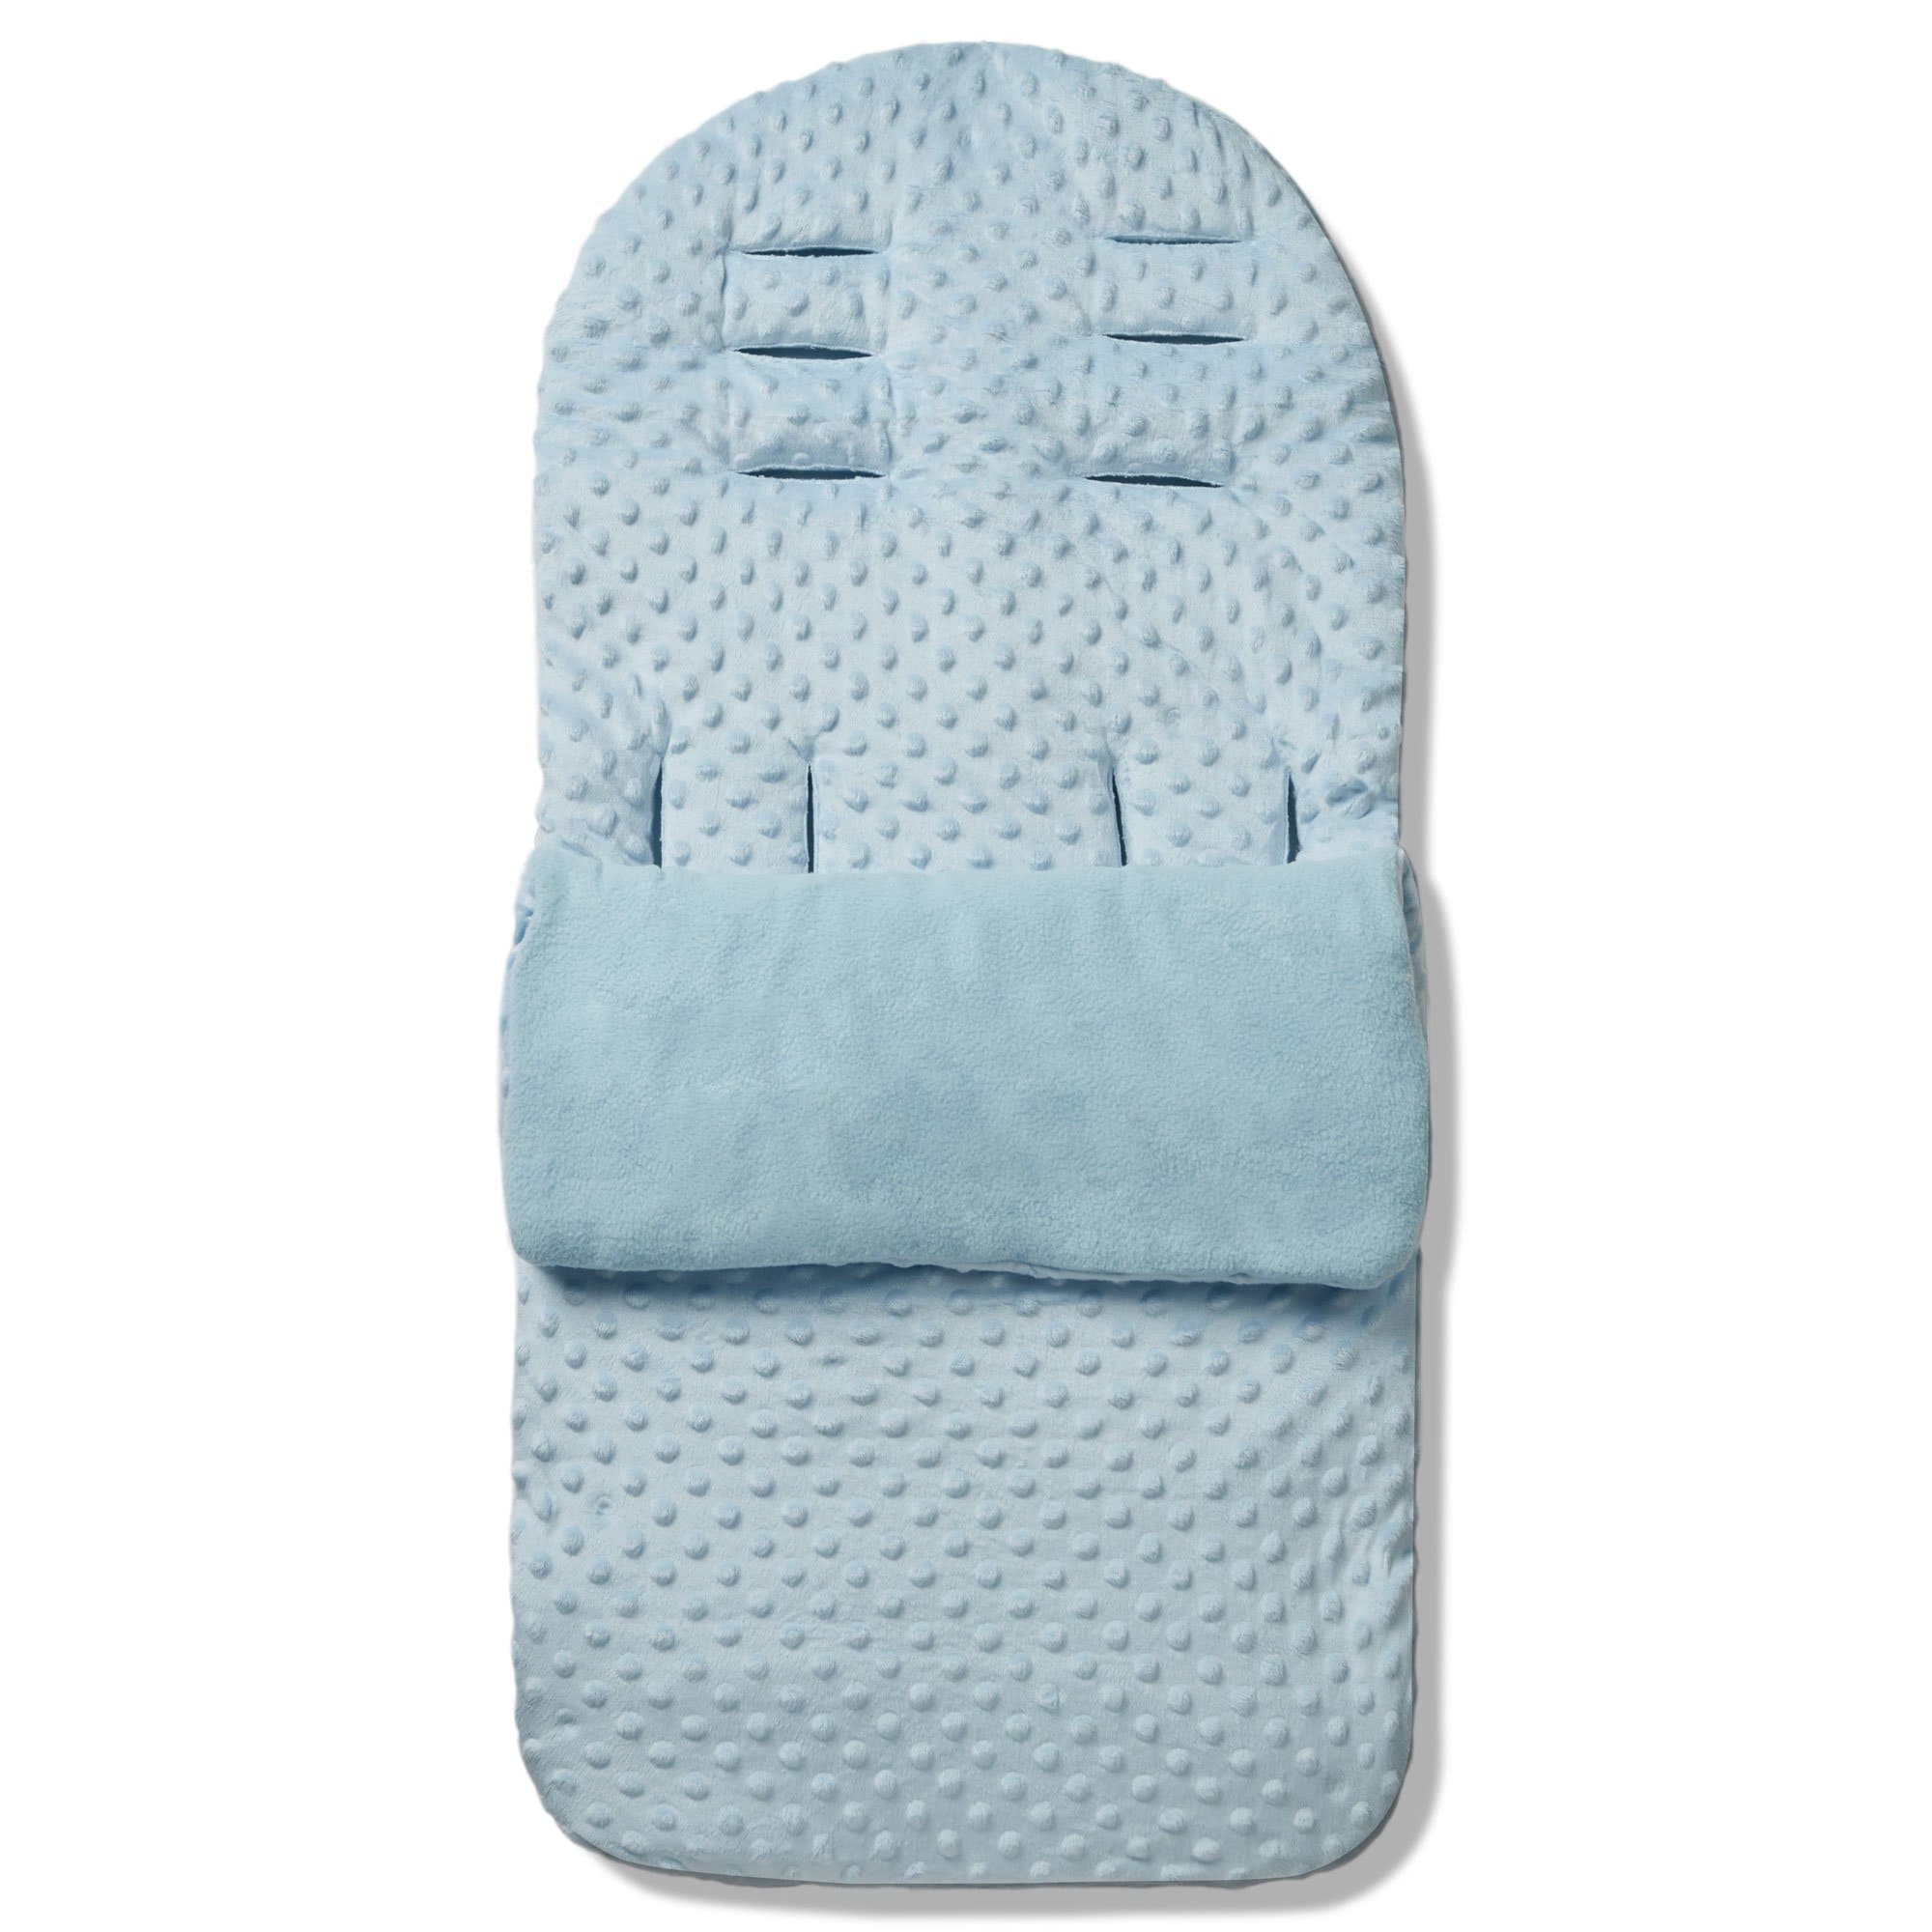 Dimple Footmuff / Cosy Toes Compatible with Tippitoes - Blue / Fits All Models | For Your Little One